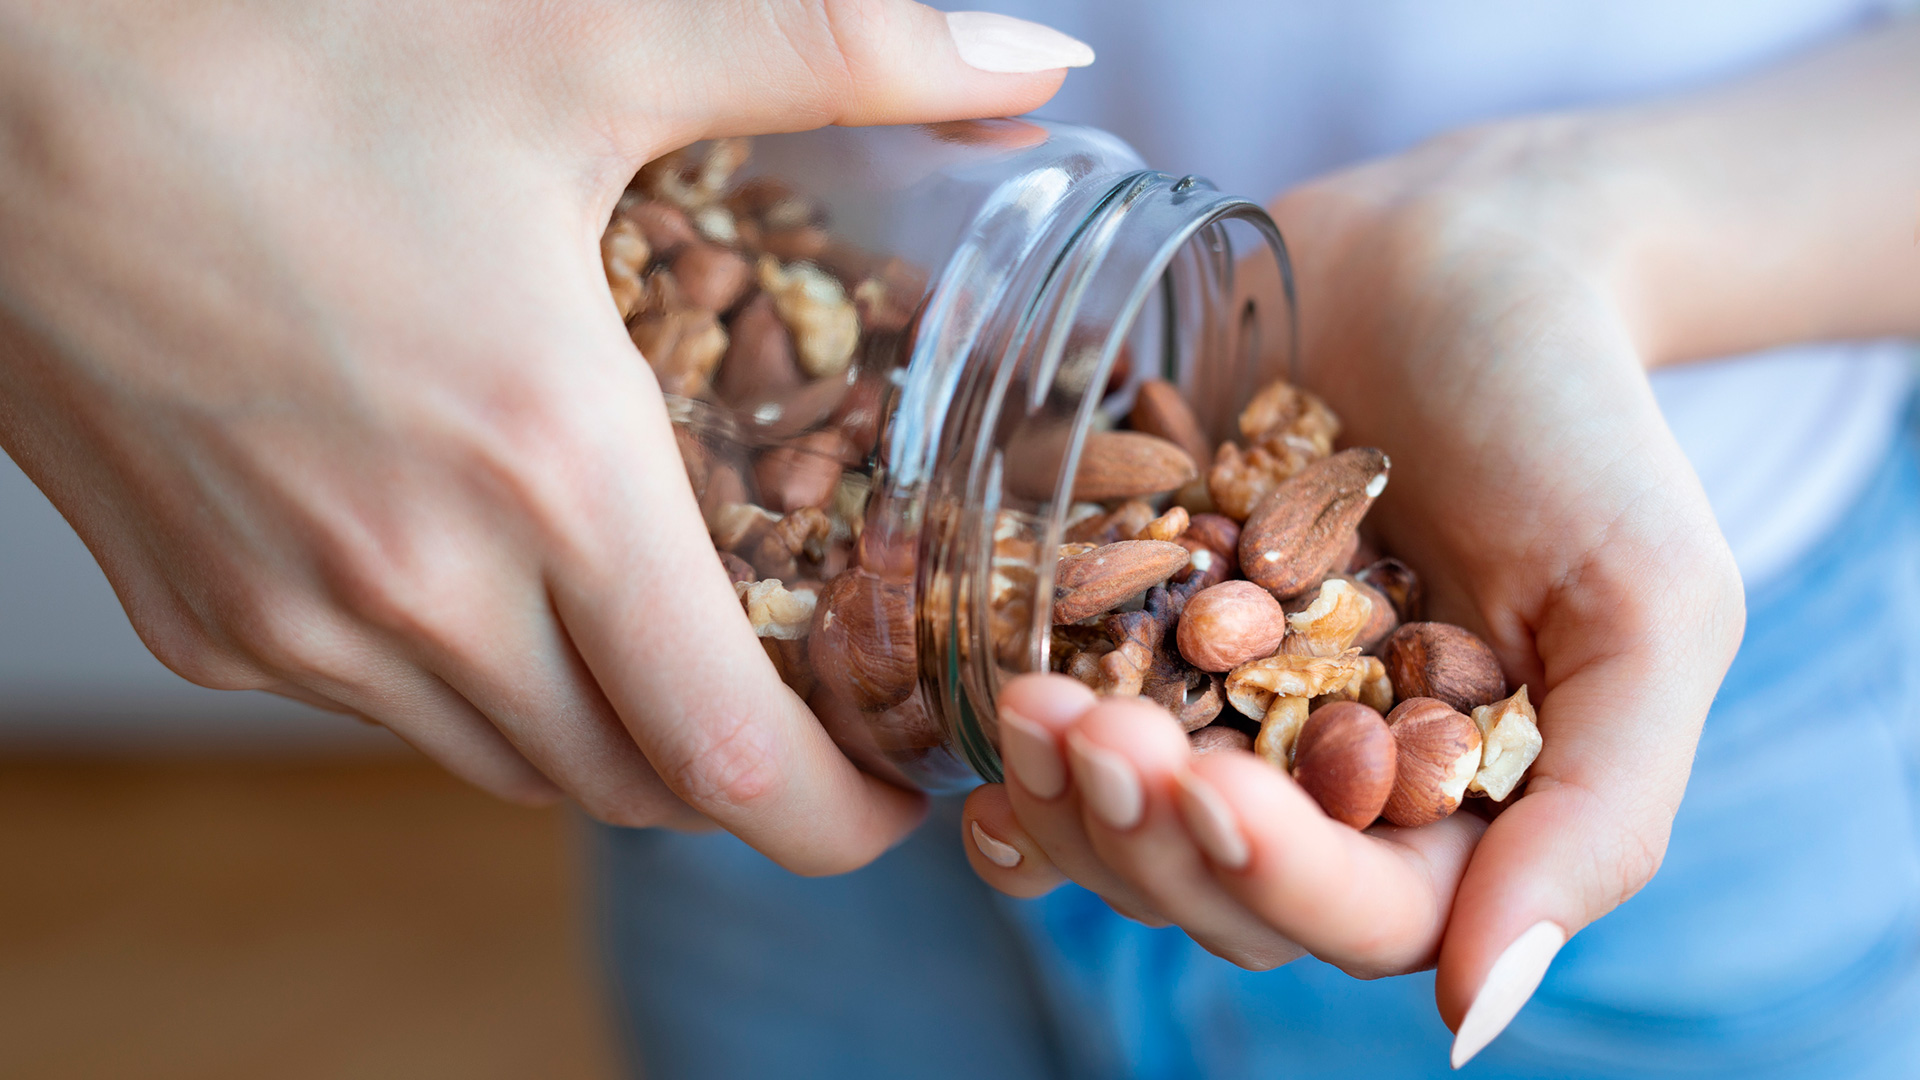 Sources rich in plant protein include nuts, seeds, lentils, quinoa, legumes, and more (Getty)